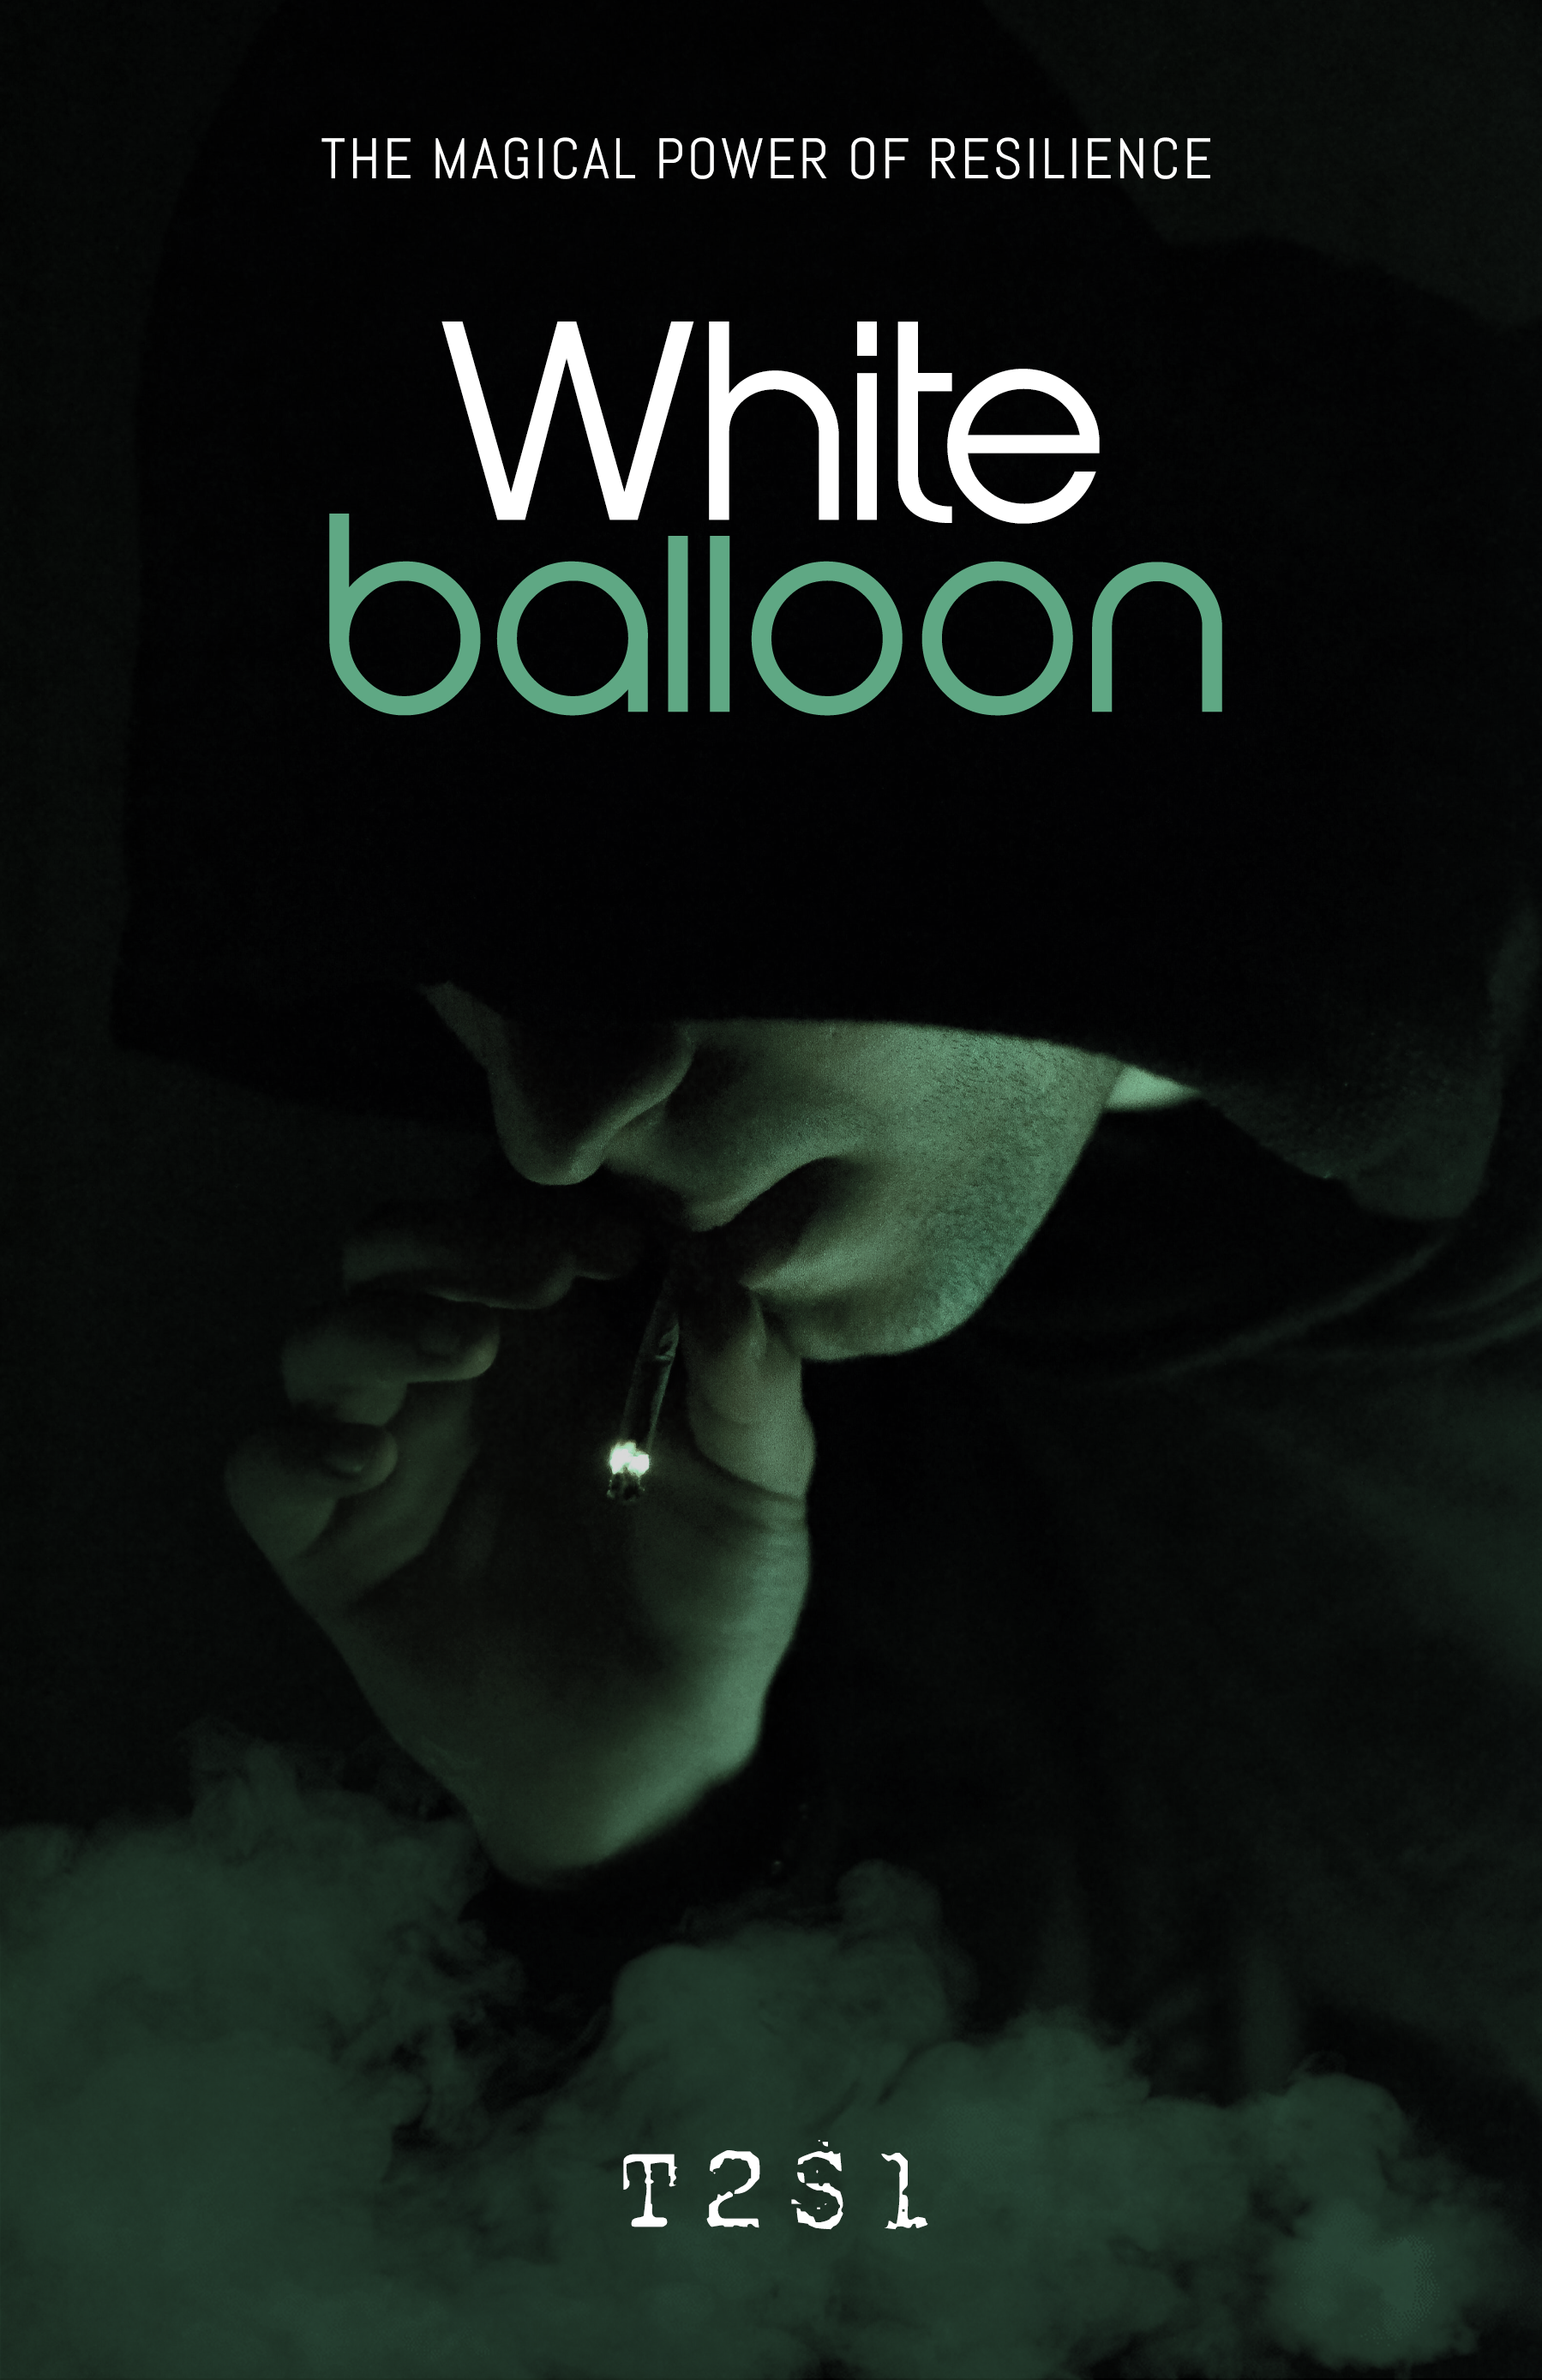 //t2s1.com/wp-content/uploads/2020/11/WhiteBalloon.png